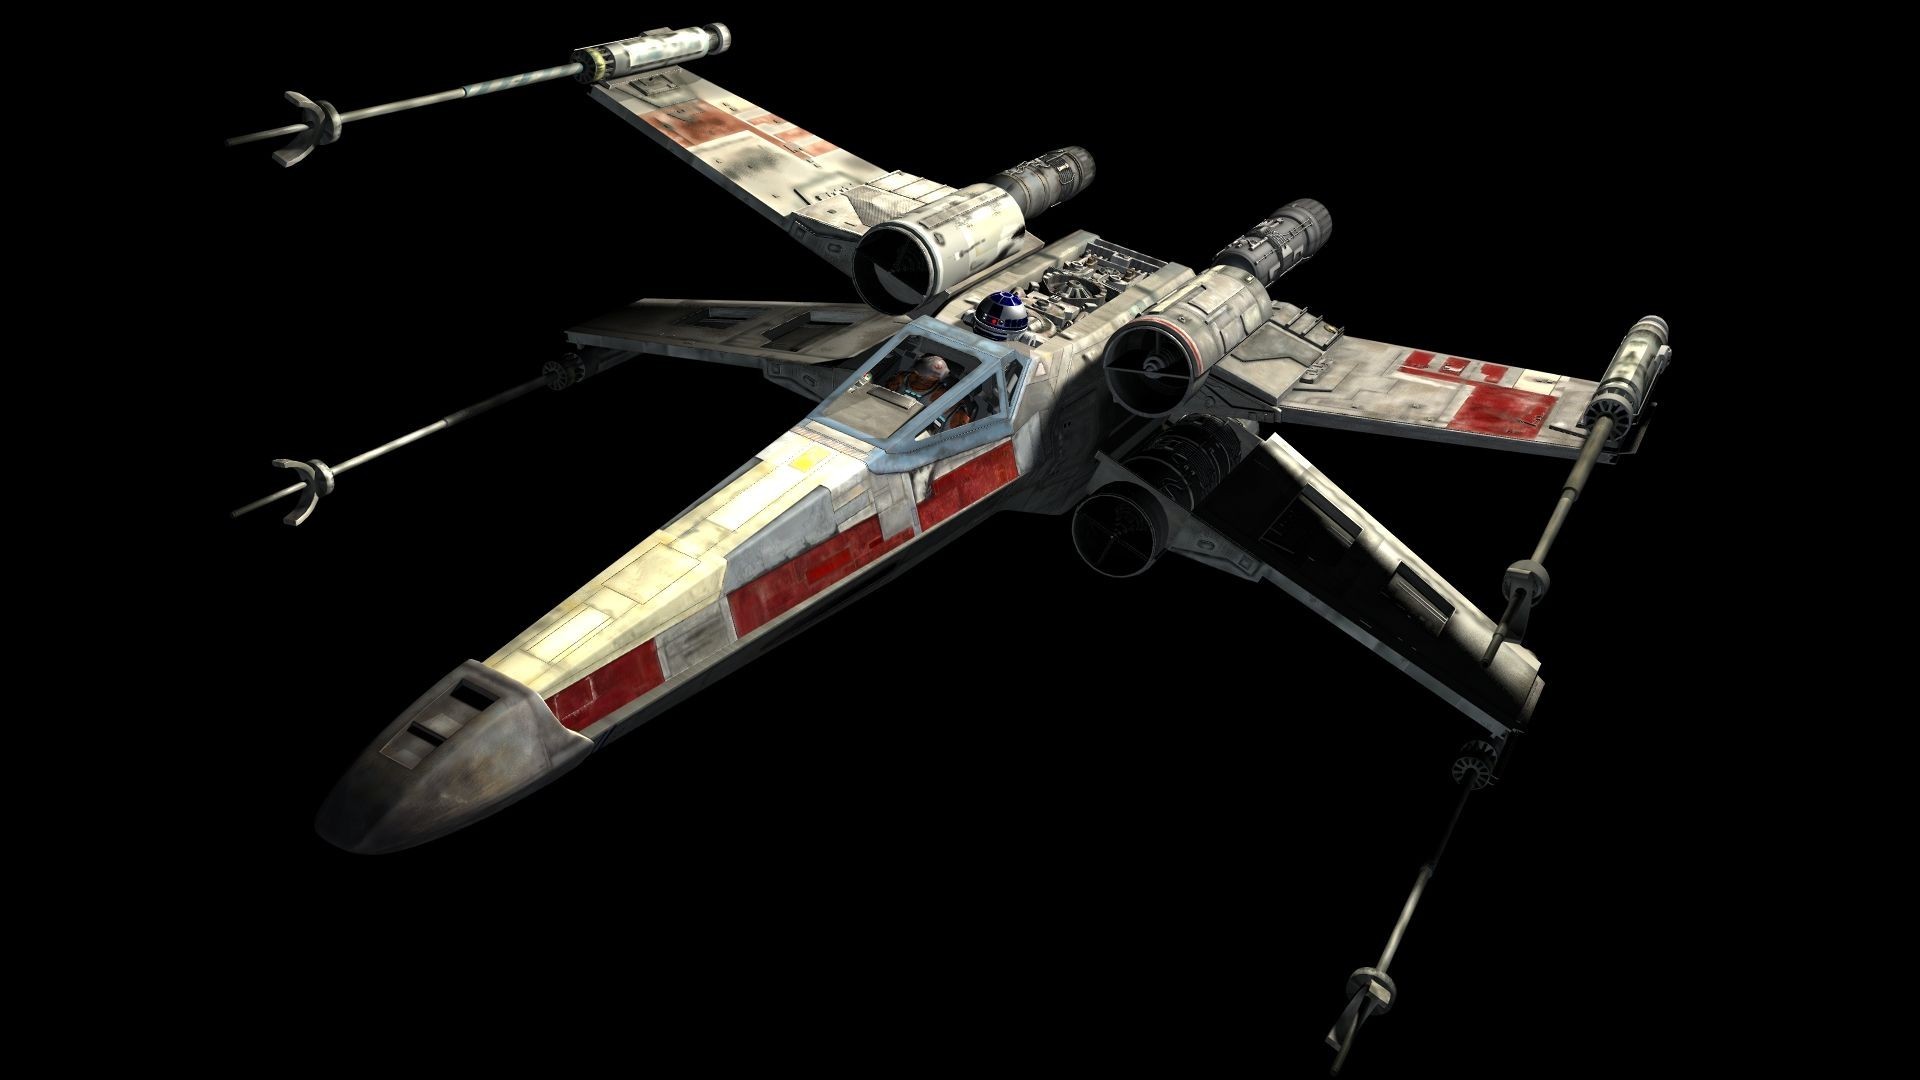 1920x1080 General  Star Wars X-wing science fiction R2-D2 space movies black  background